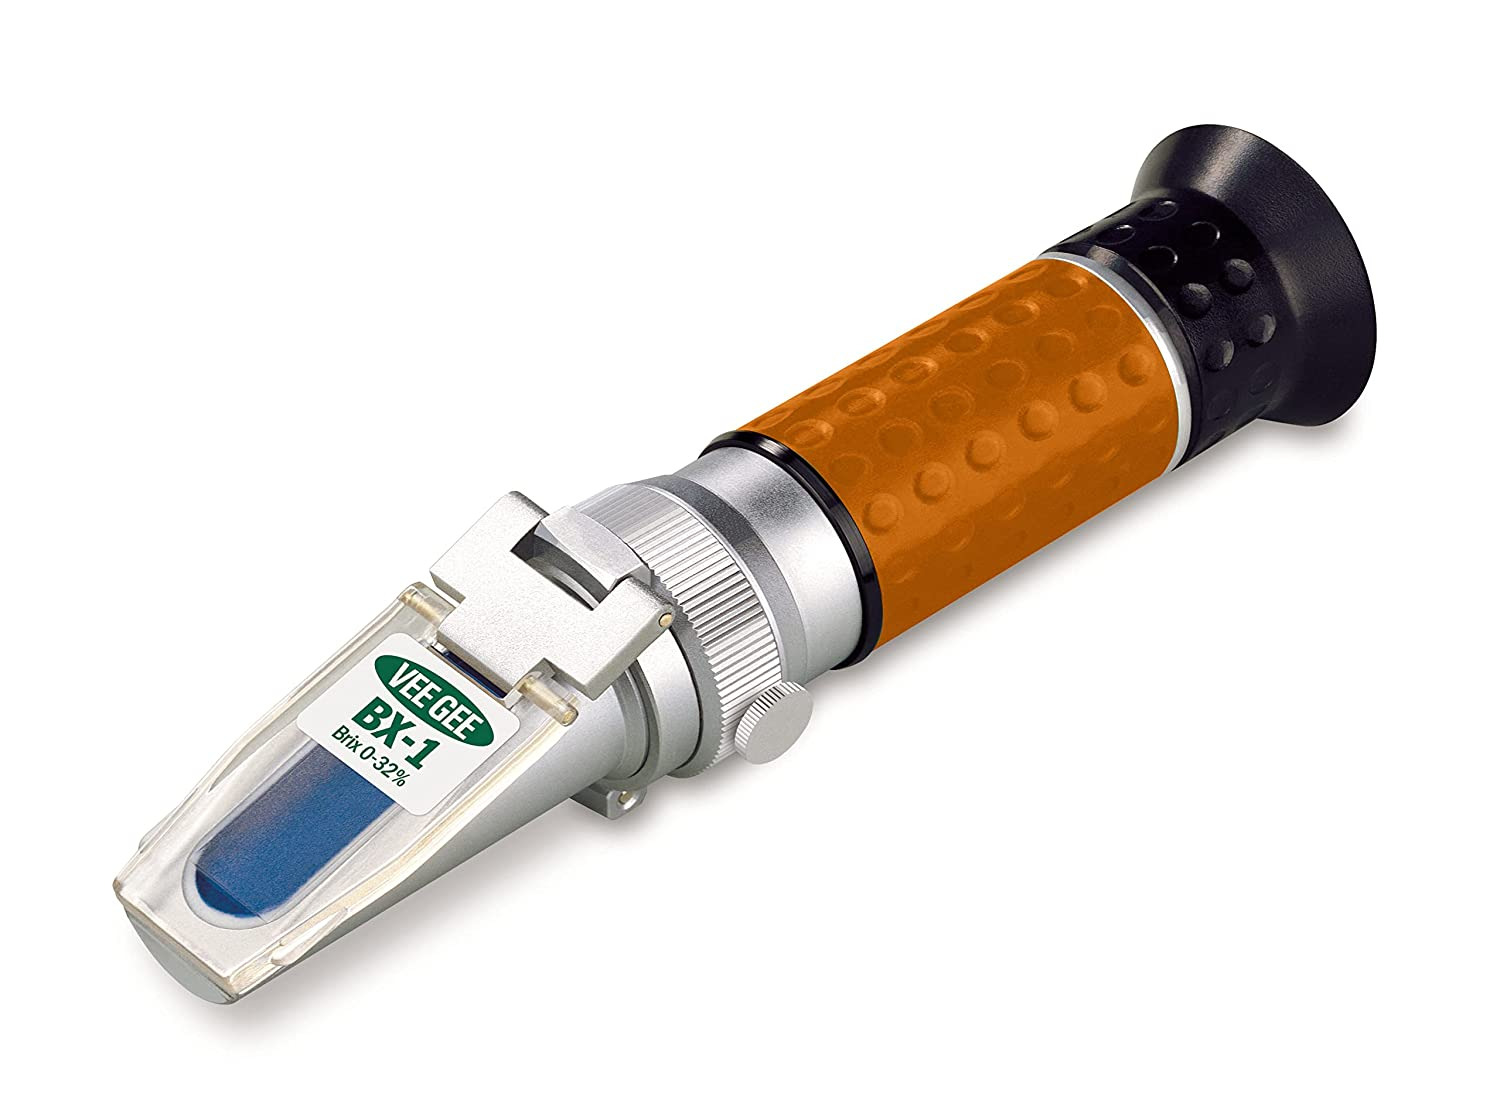 Bx-1 Handheld Refractometer, With Brix Scale, 0-32%, +/-0.2% Accuracy, 0.2% Reso